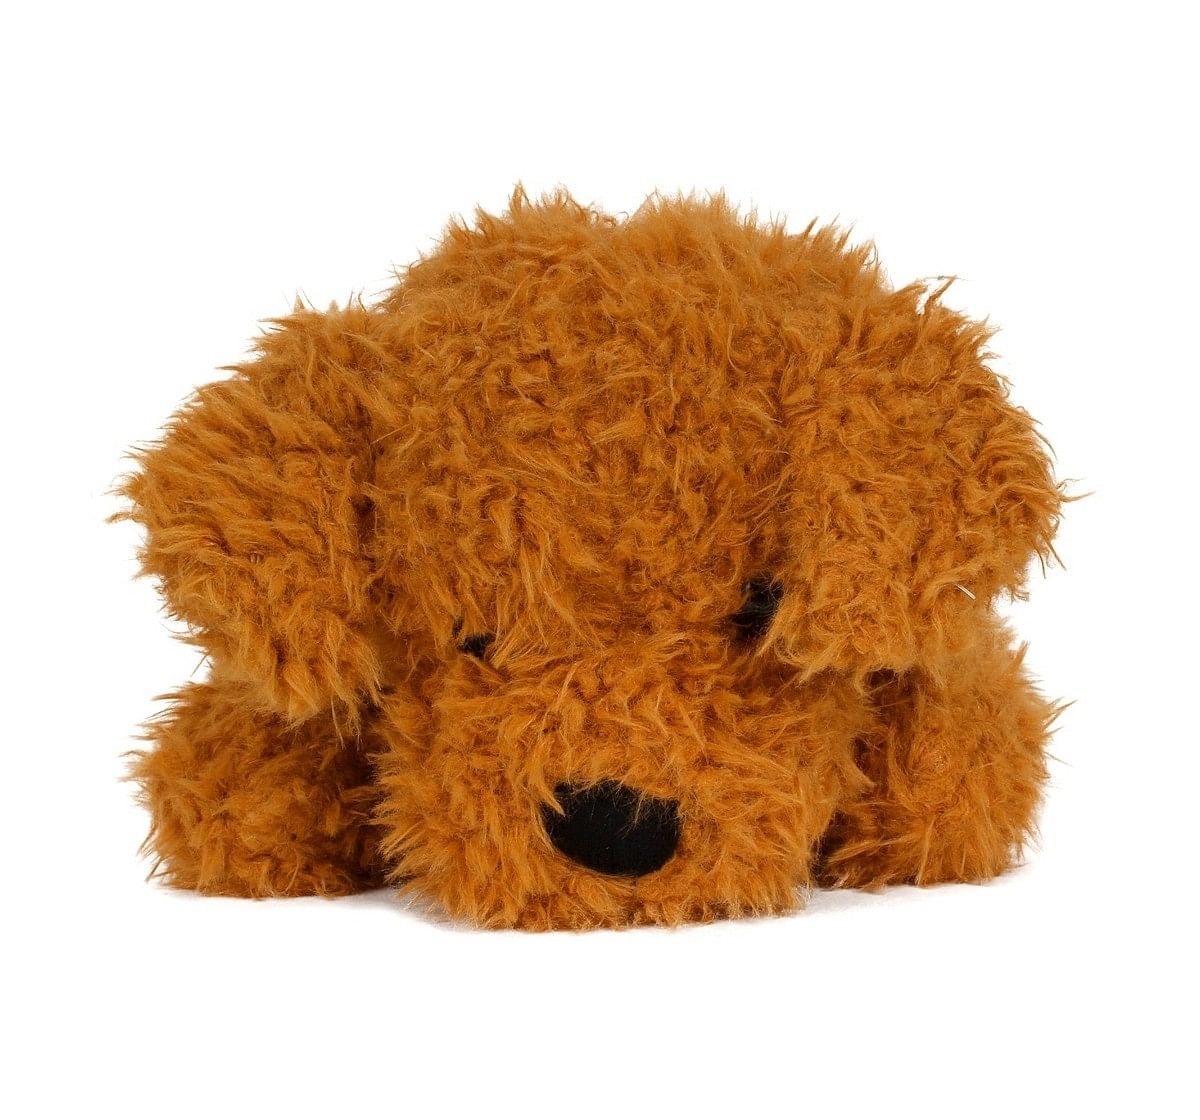 Fuzzbuzz Sitting Dog - Lt. Brown - 25Cm Quirky Soft Toys for Kids age 0M+ - 25 Cm (Light Brown)